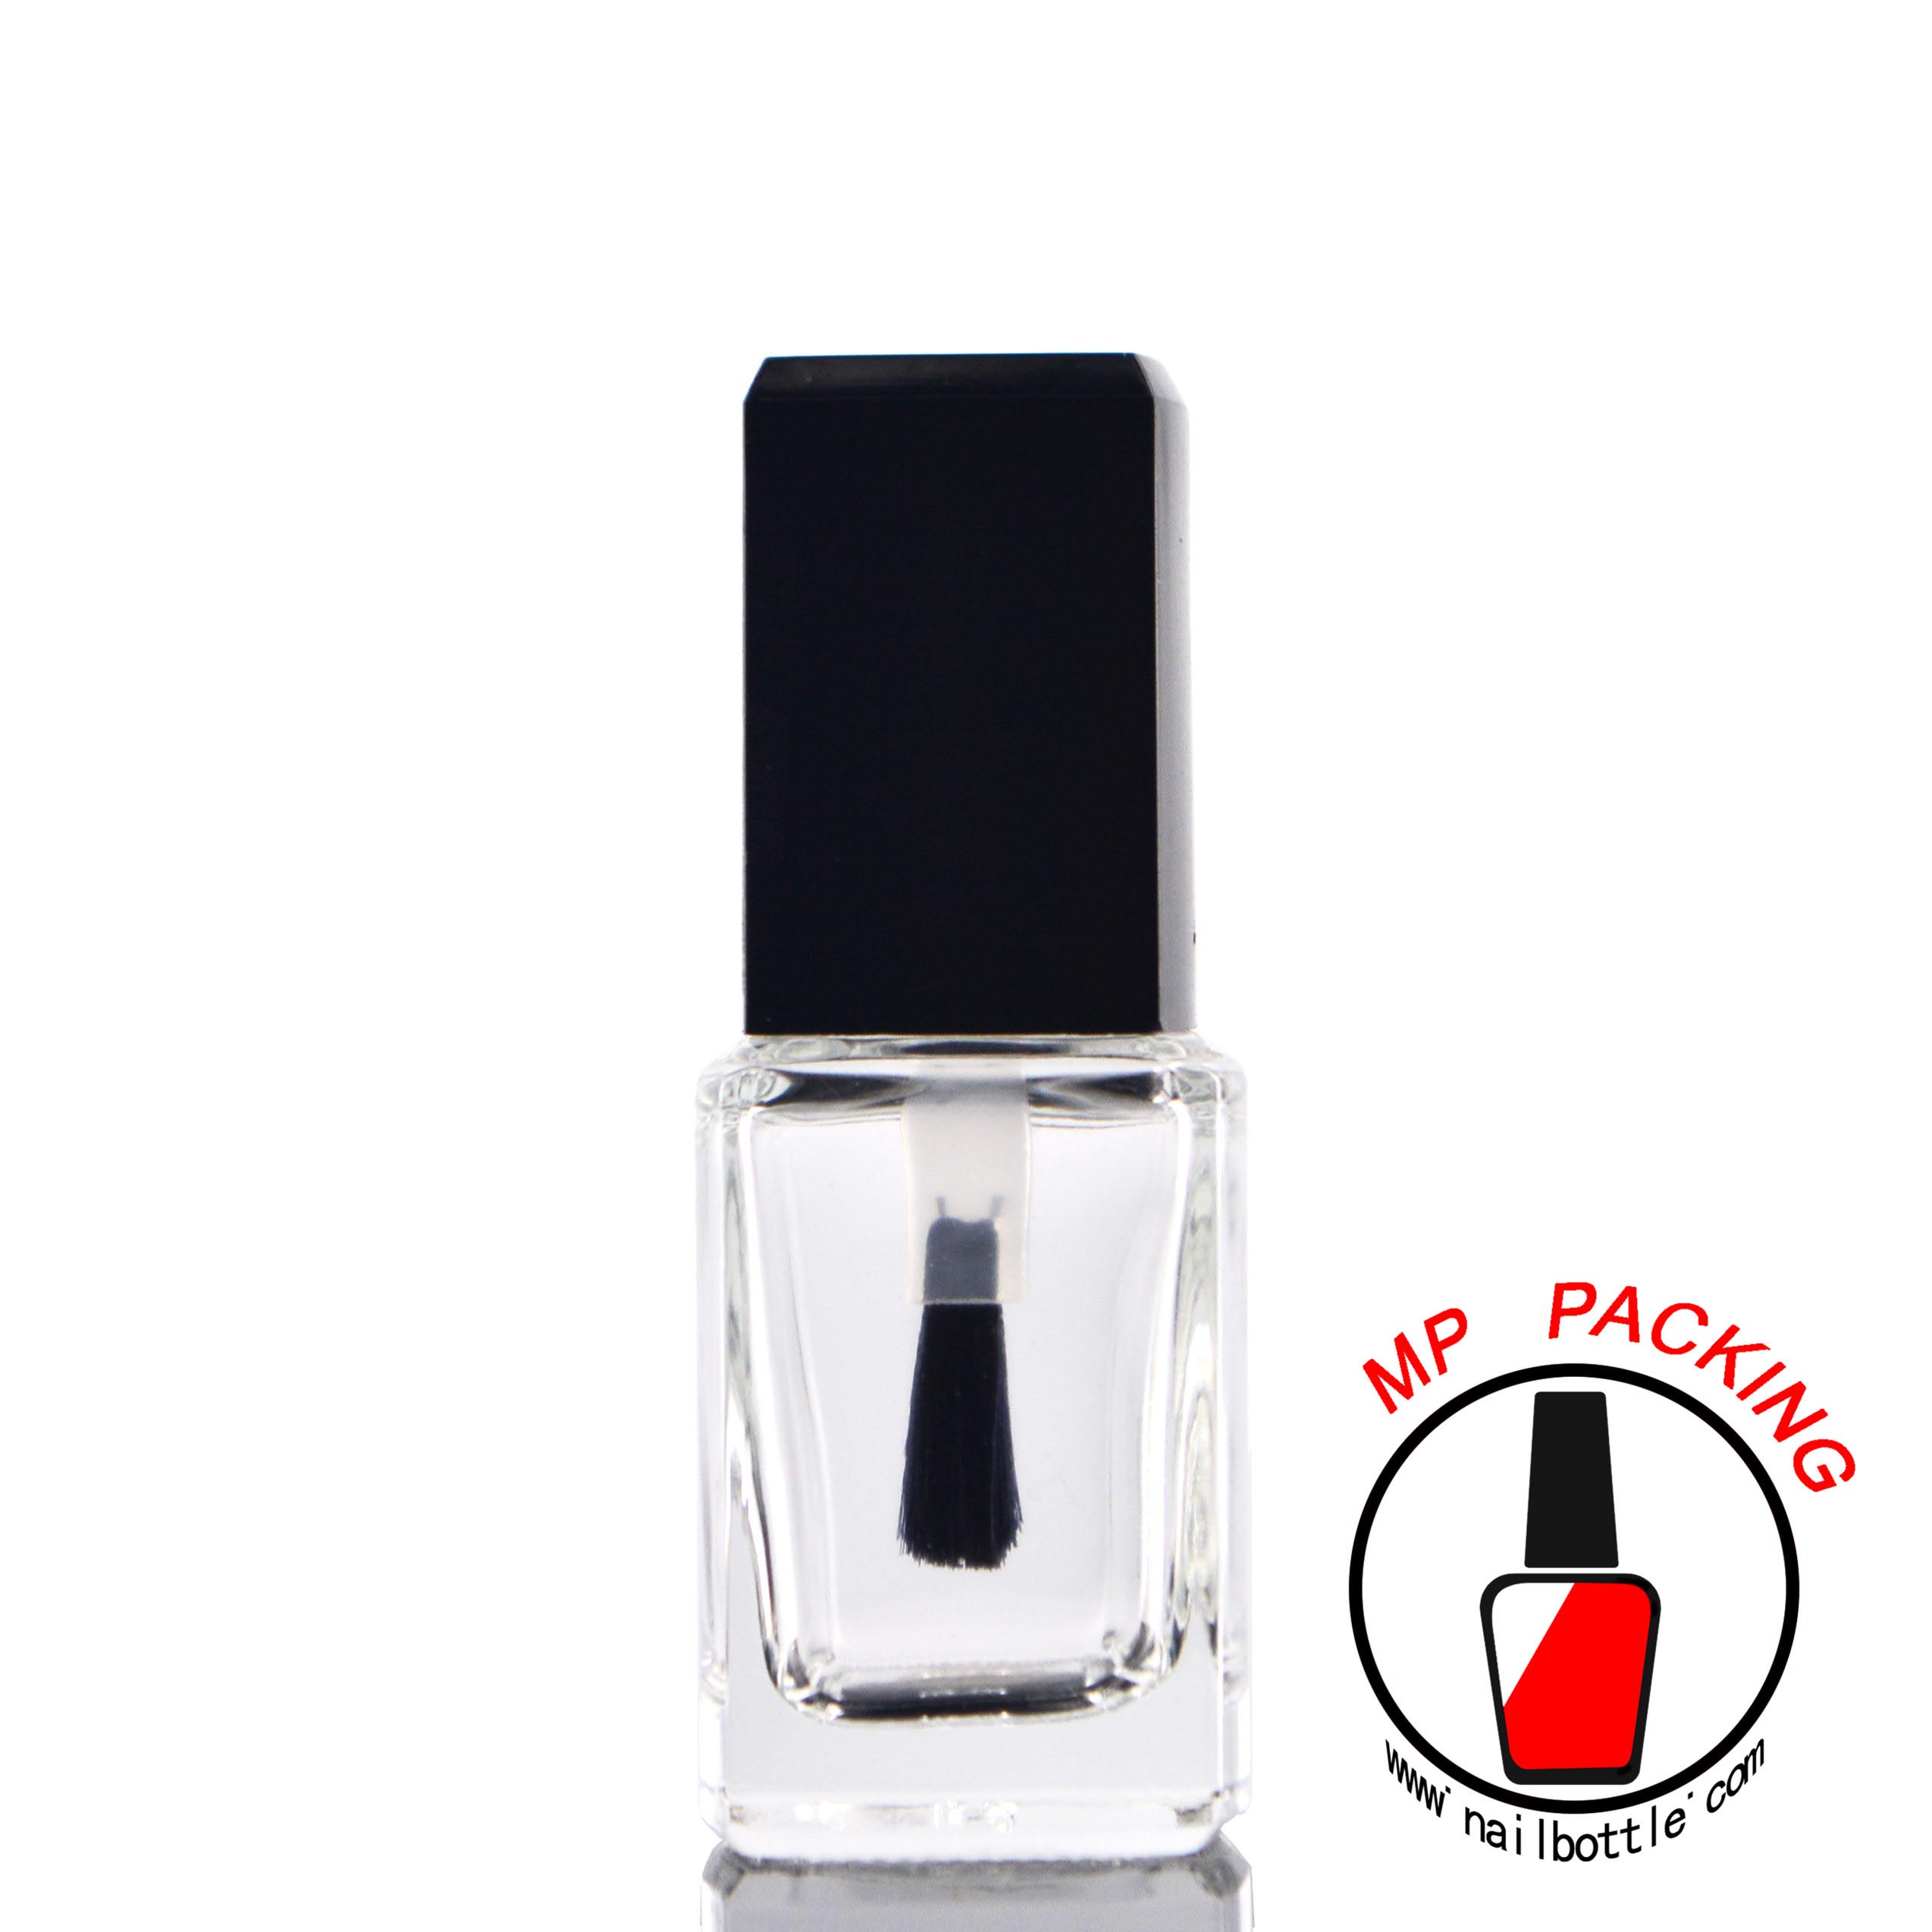 square nail polish bottles brands package 